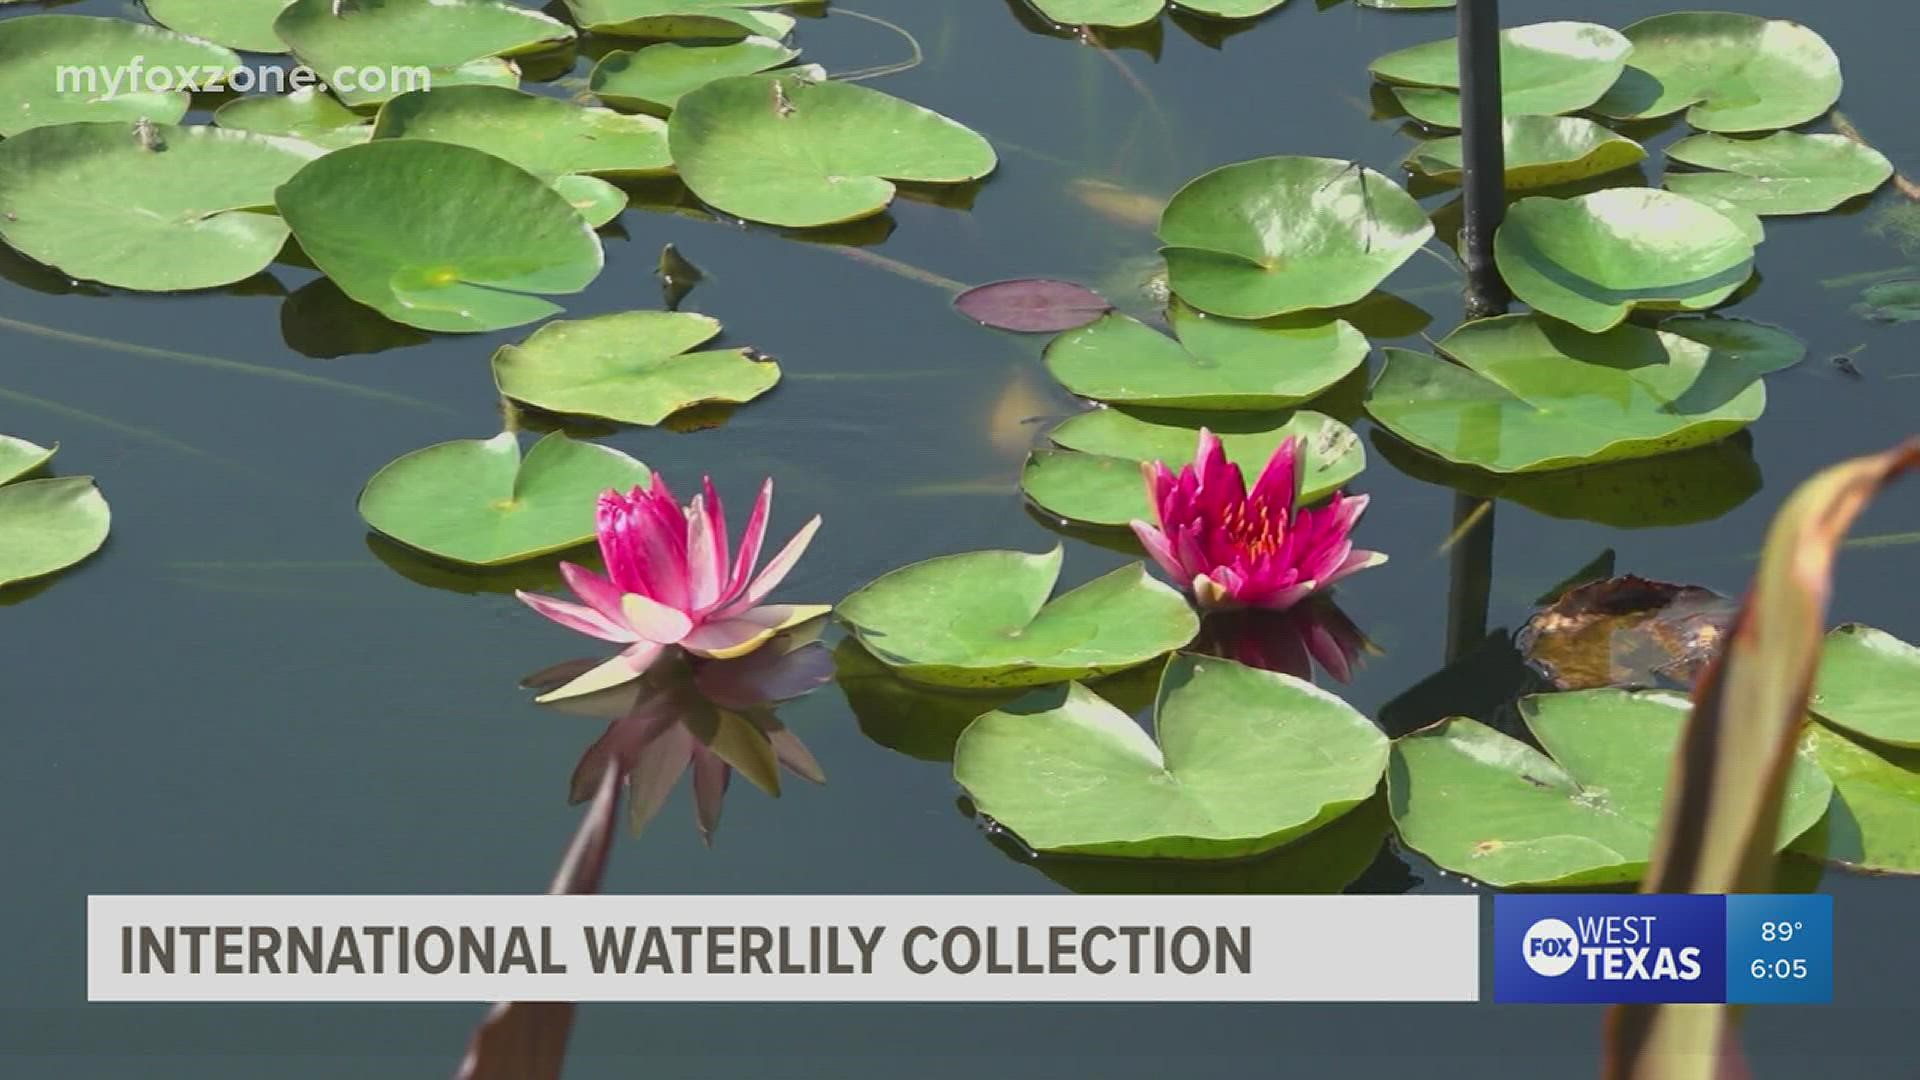 The event will feature refreshments, live music and guided tours of the largest collection of water lilies in the world, right here in San Angelo.